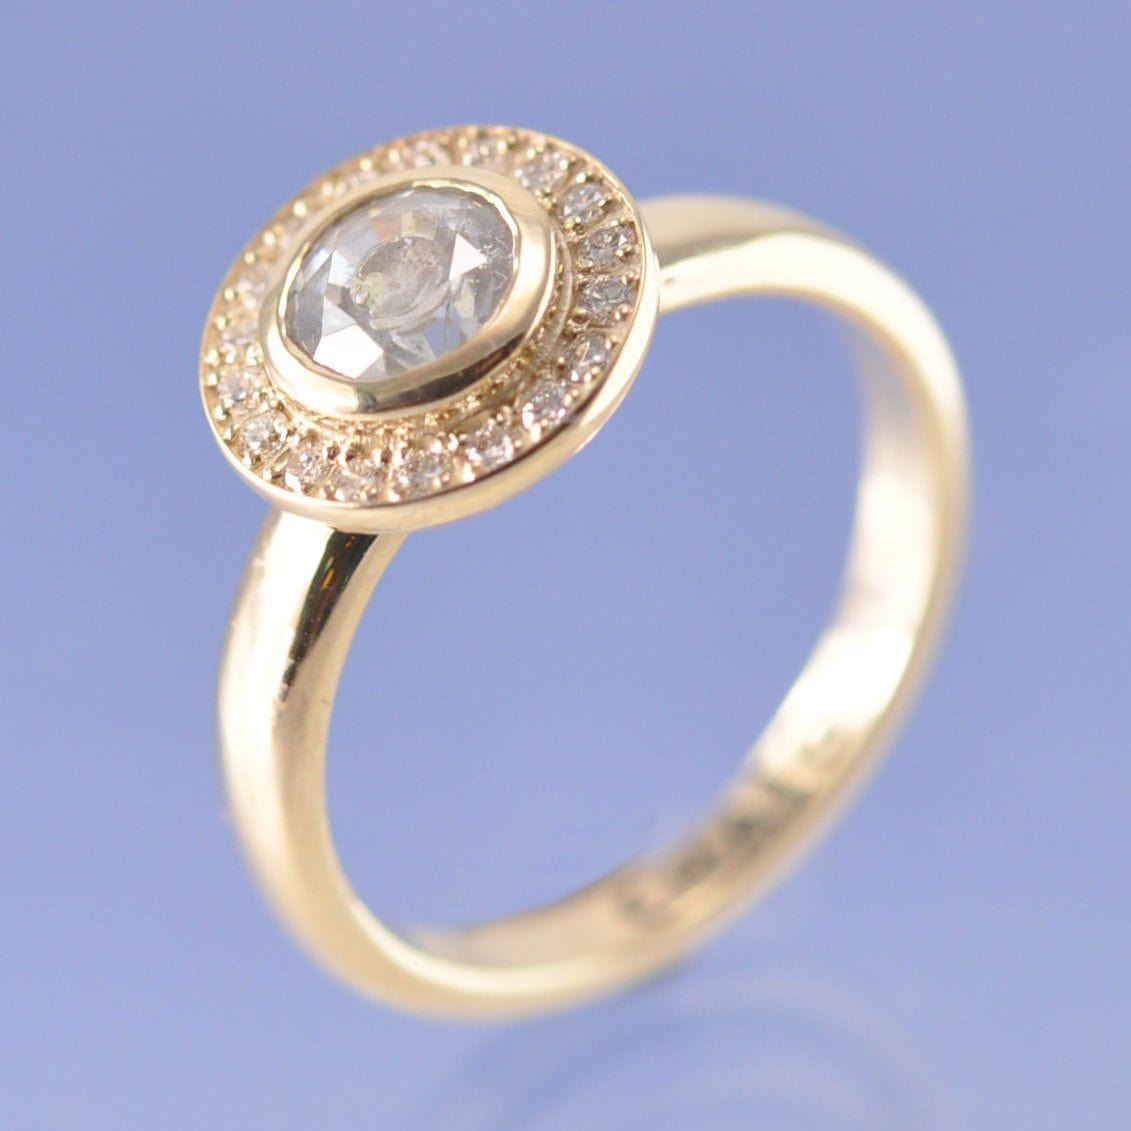 Sparkling Halo Ash in Gemstone Ring Ring by Chris Parry Jewellery